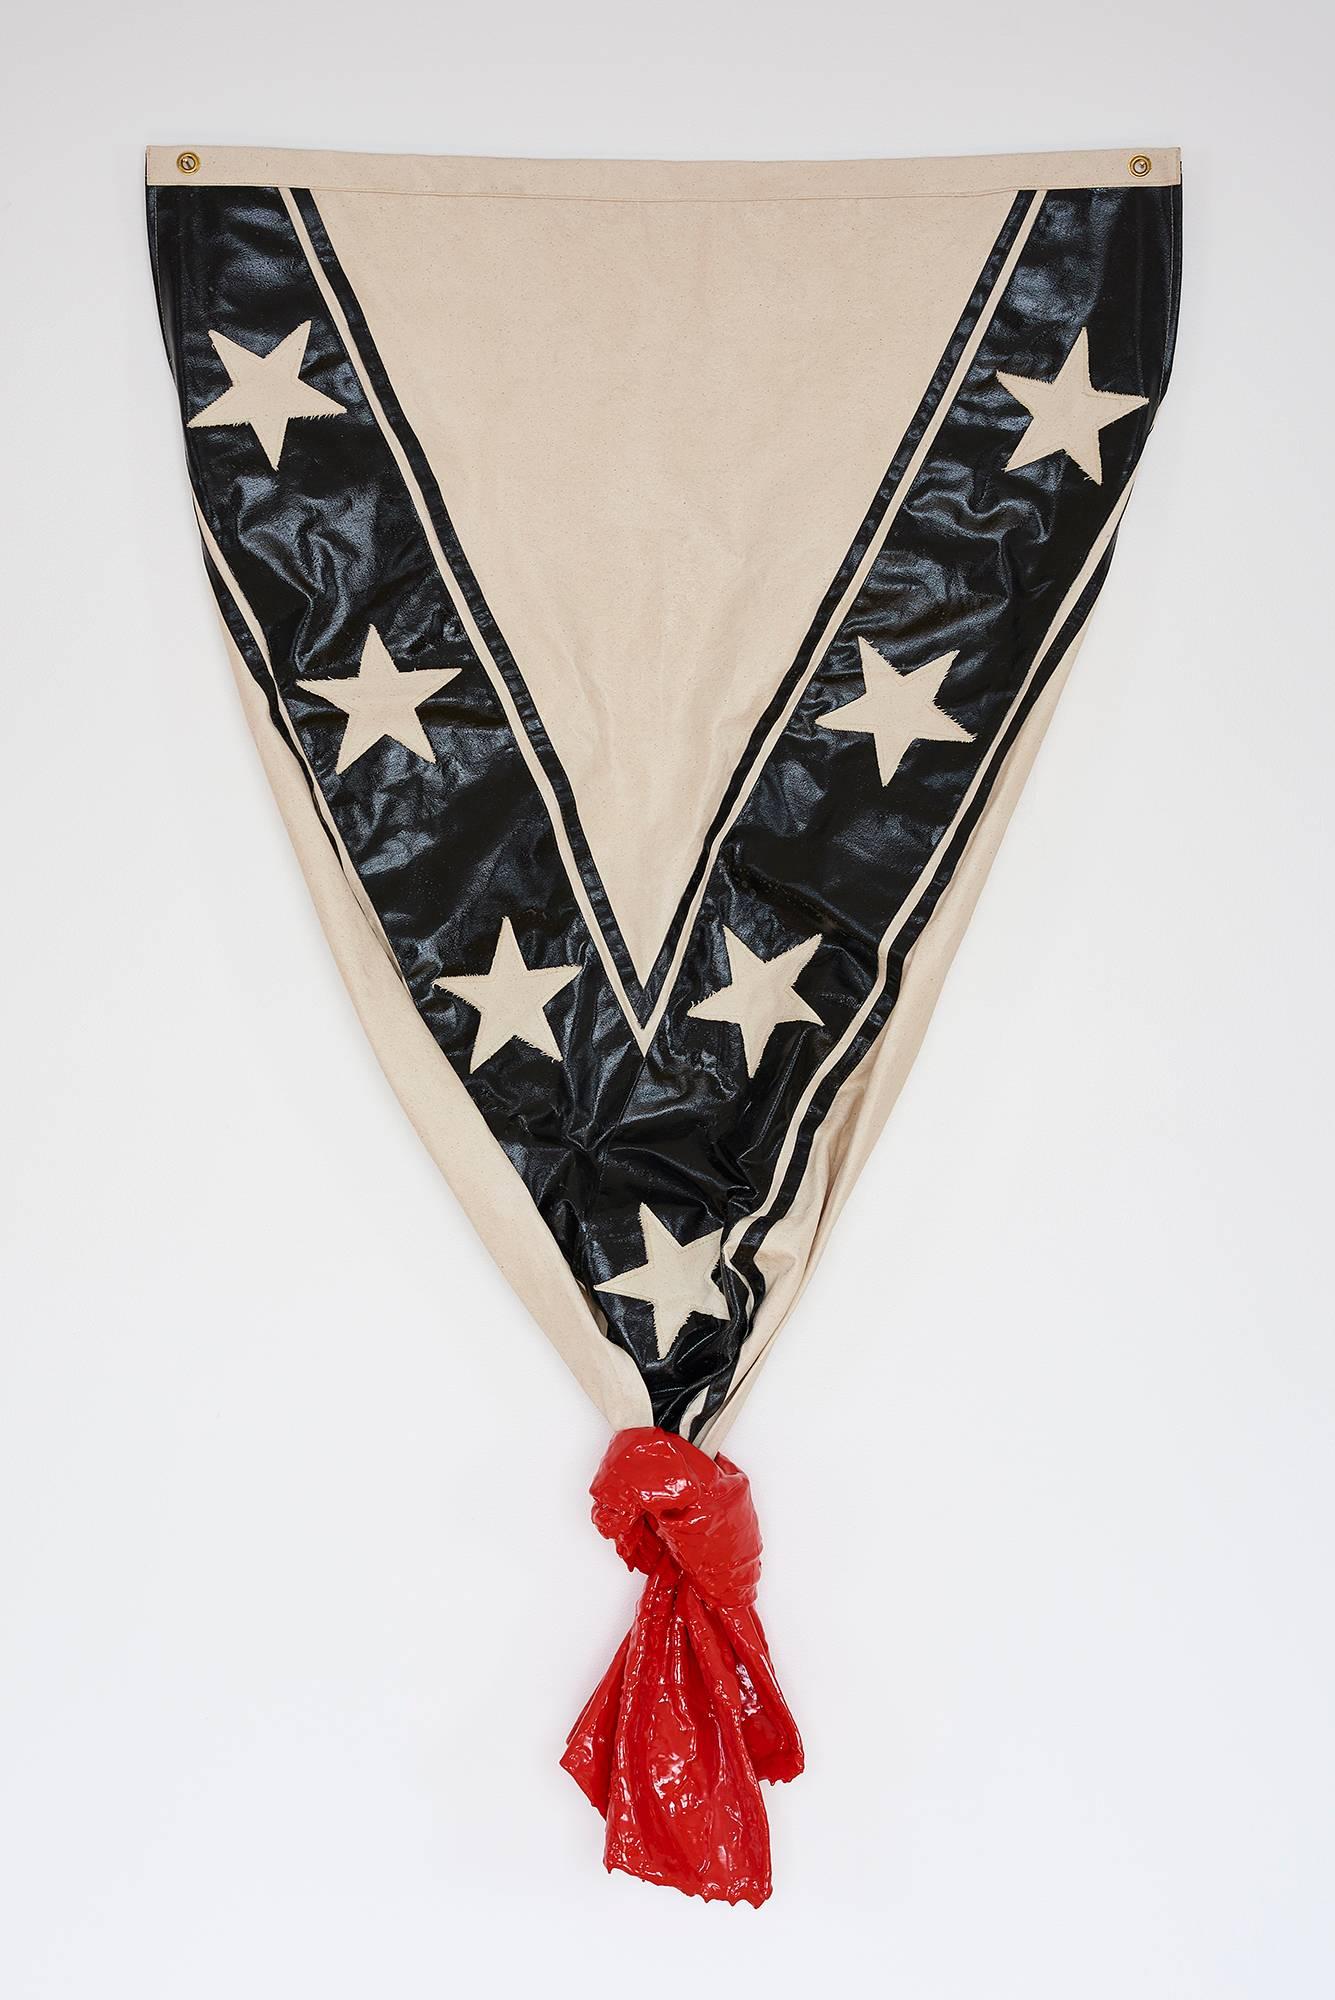 Hand-sewn flag in black and white canvas, knotted, dipped in resin and painted.

Whistling Dixie, 2017
Canvas, polyester resin, acrylic paint, pigment.
Edition of five plus one AP. Signed on verso.
60 x 35 in.

Together with certificate of